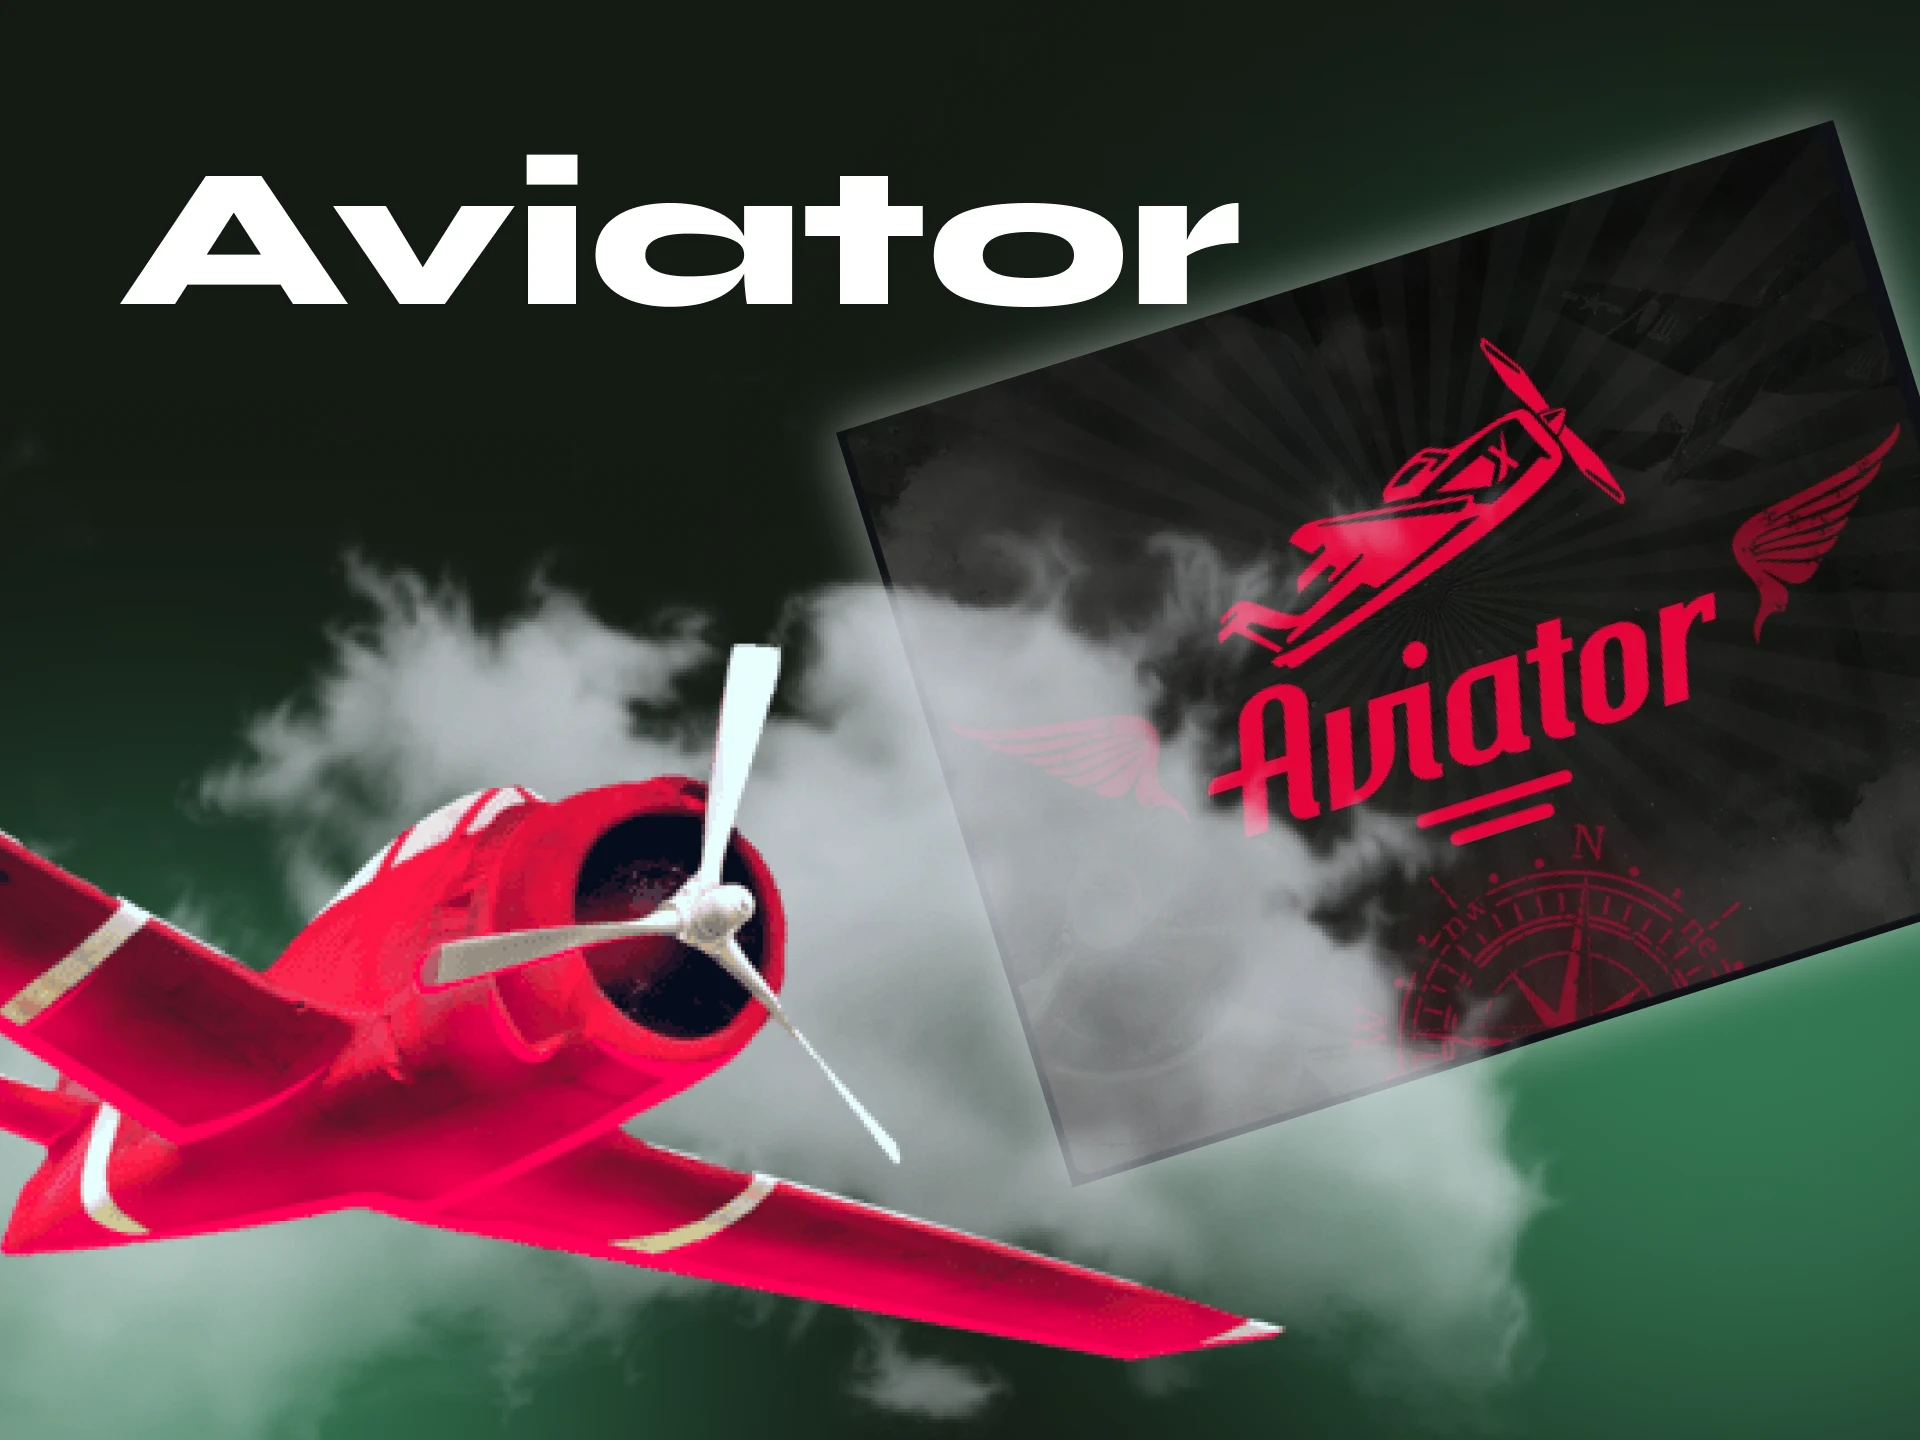 How can I win in the Aviator game.